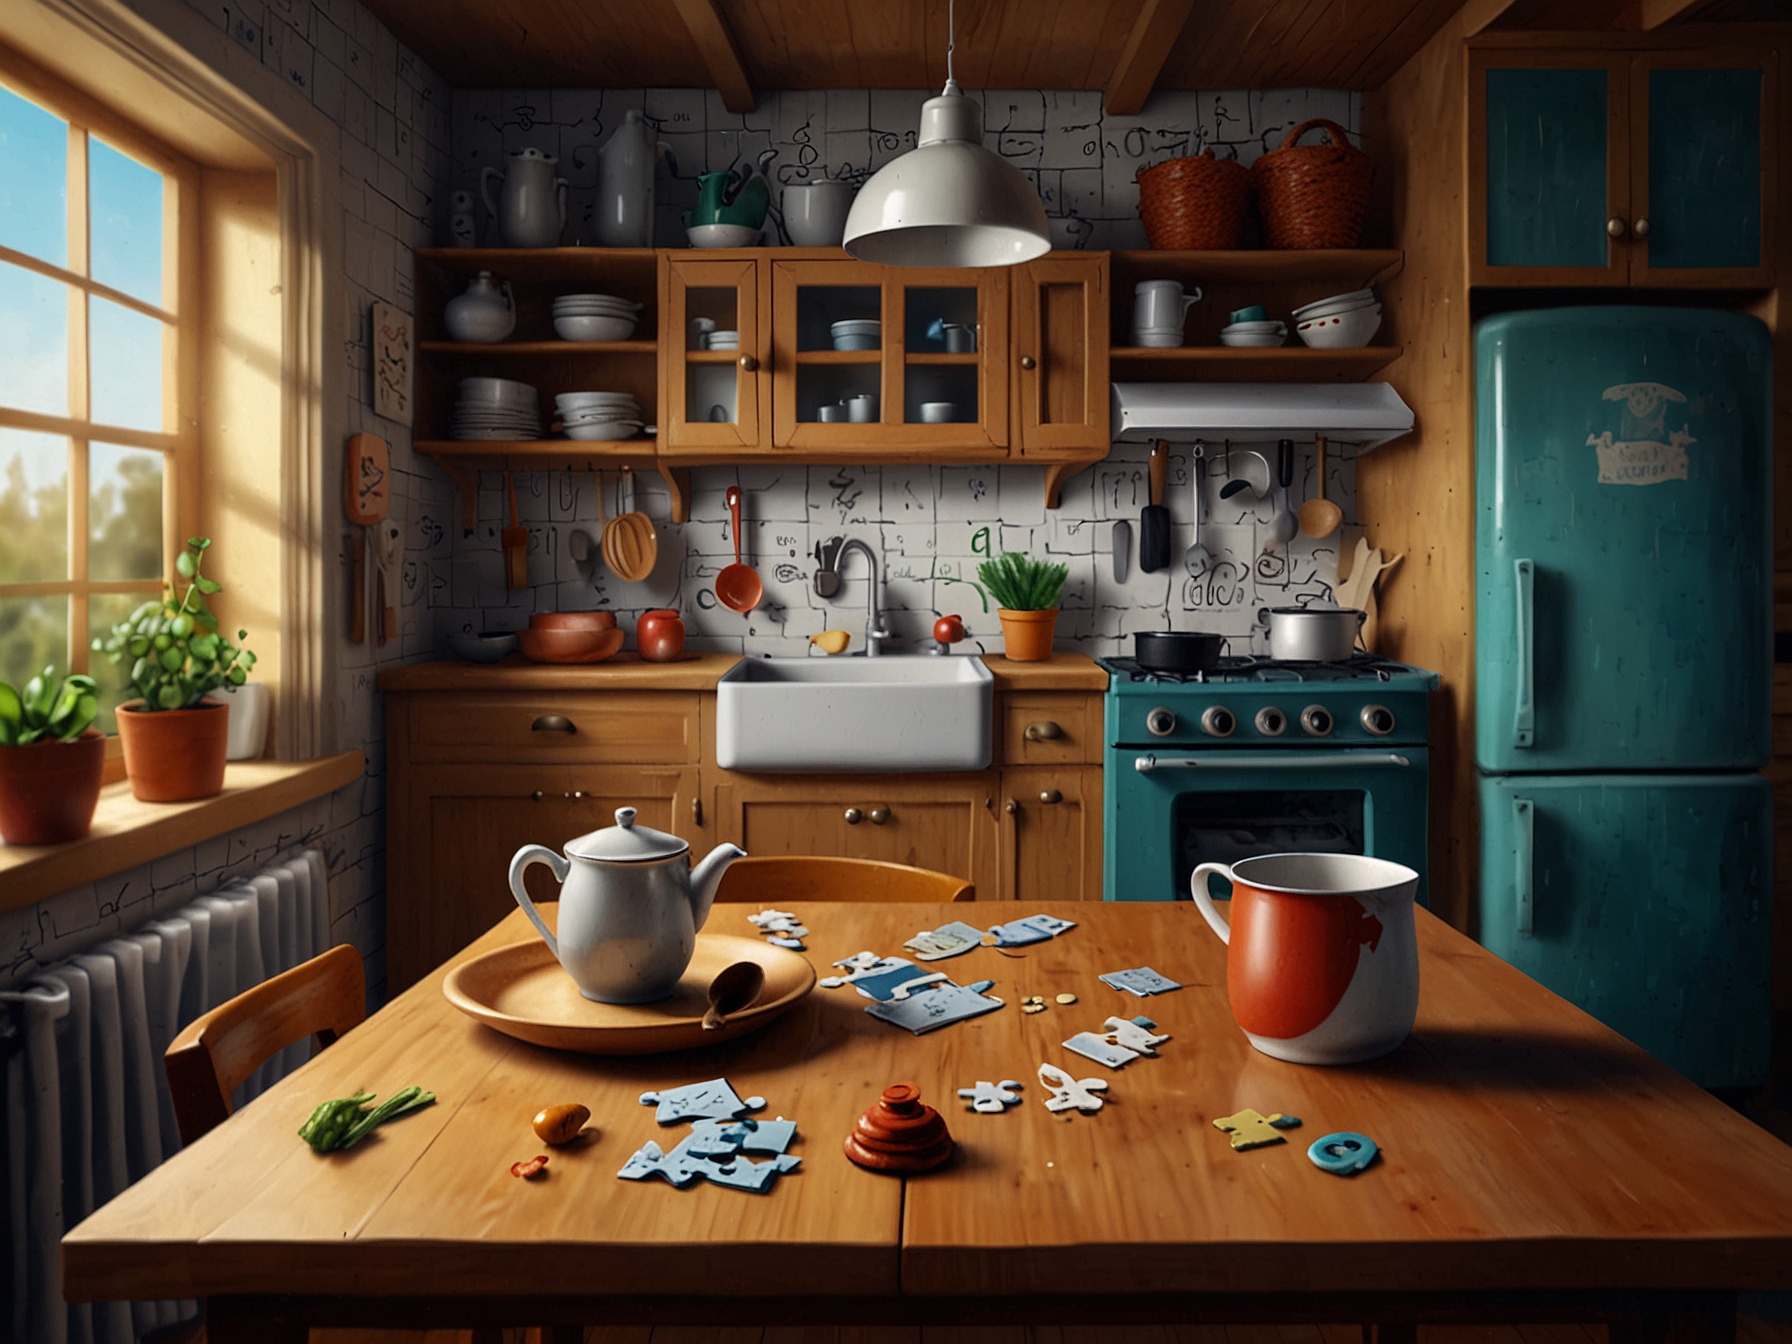 A scene featuring a cozy kitchen with various household items, signifying the kitchen-themed group of words in the puzzle, indicating the everyday objects involved.